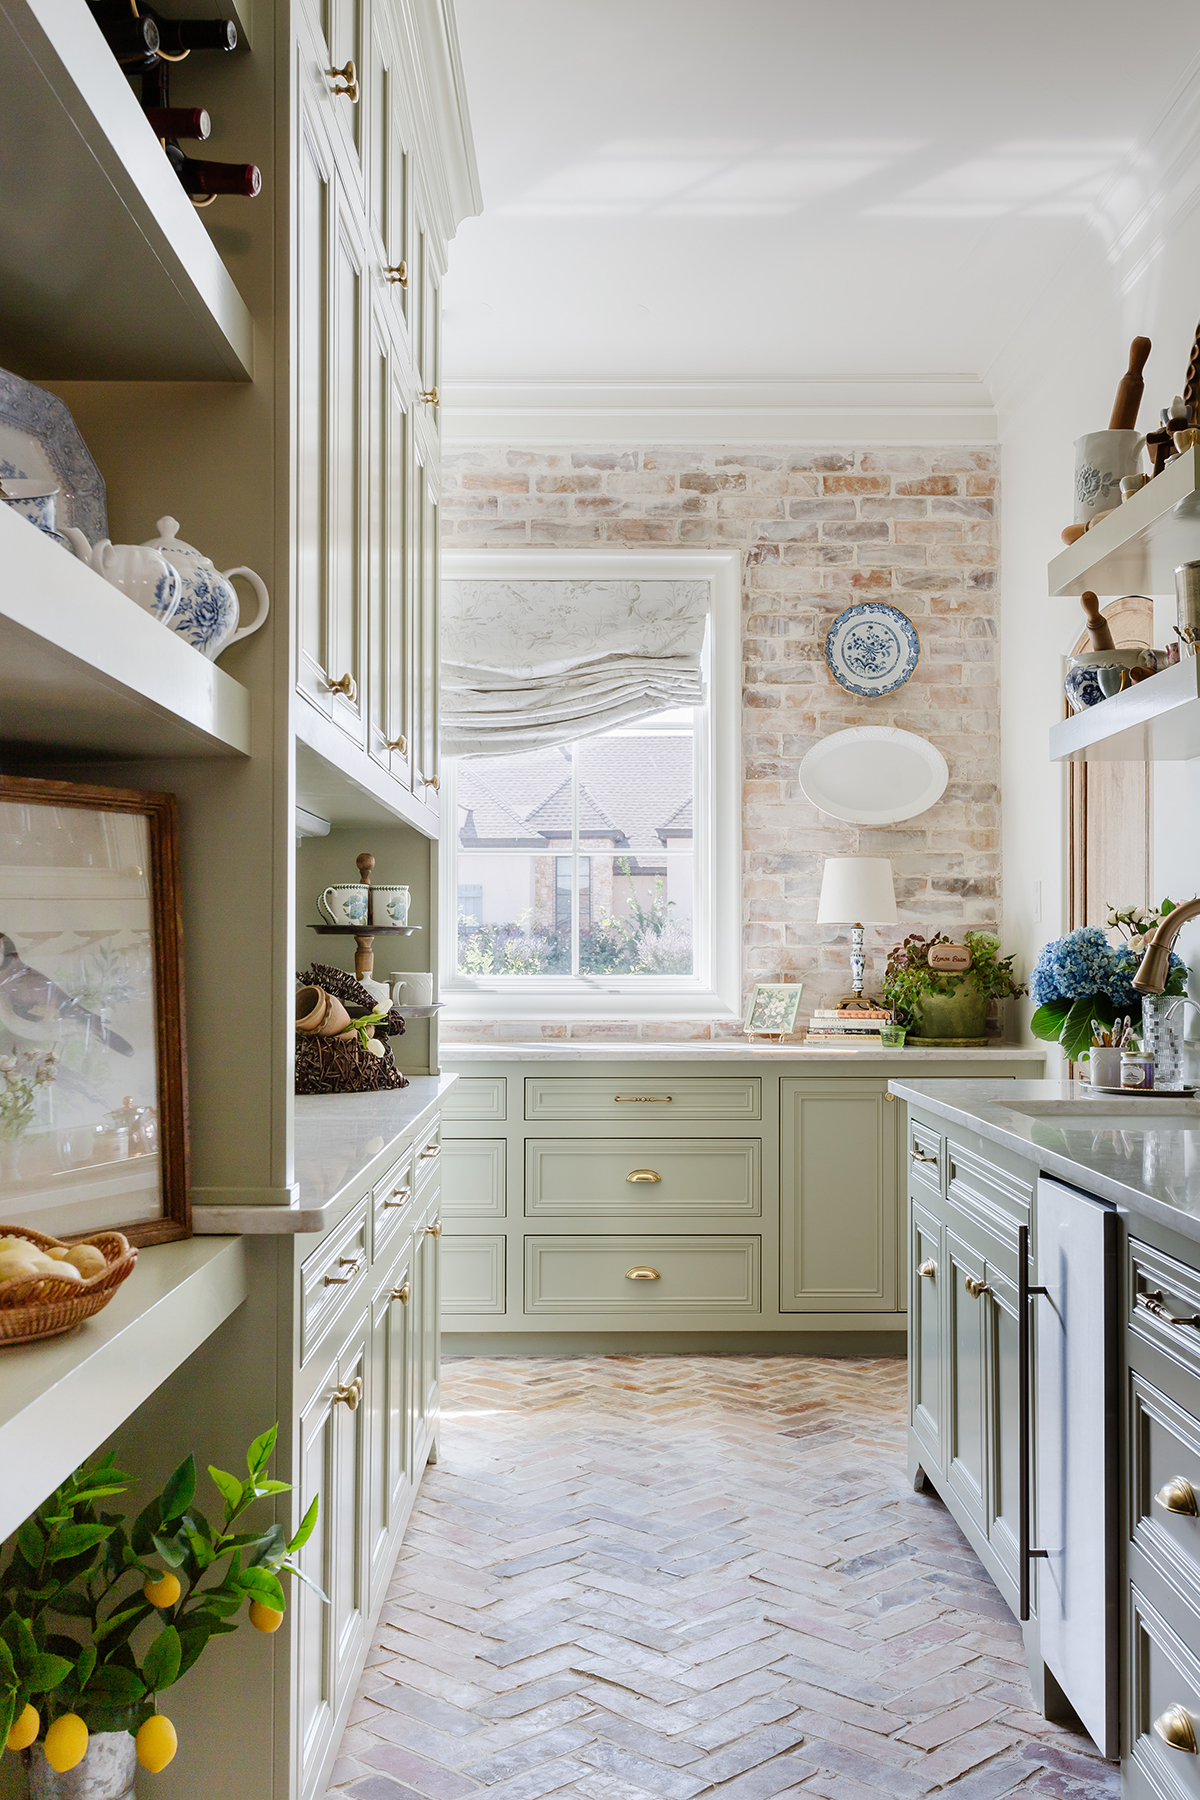 rustic French farmhouse style home butler's pantry with brick walls and floors gorgeous European style